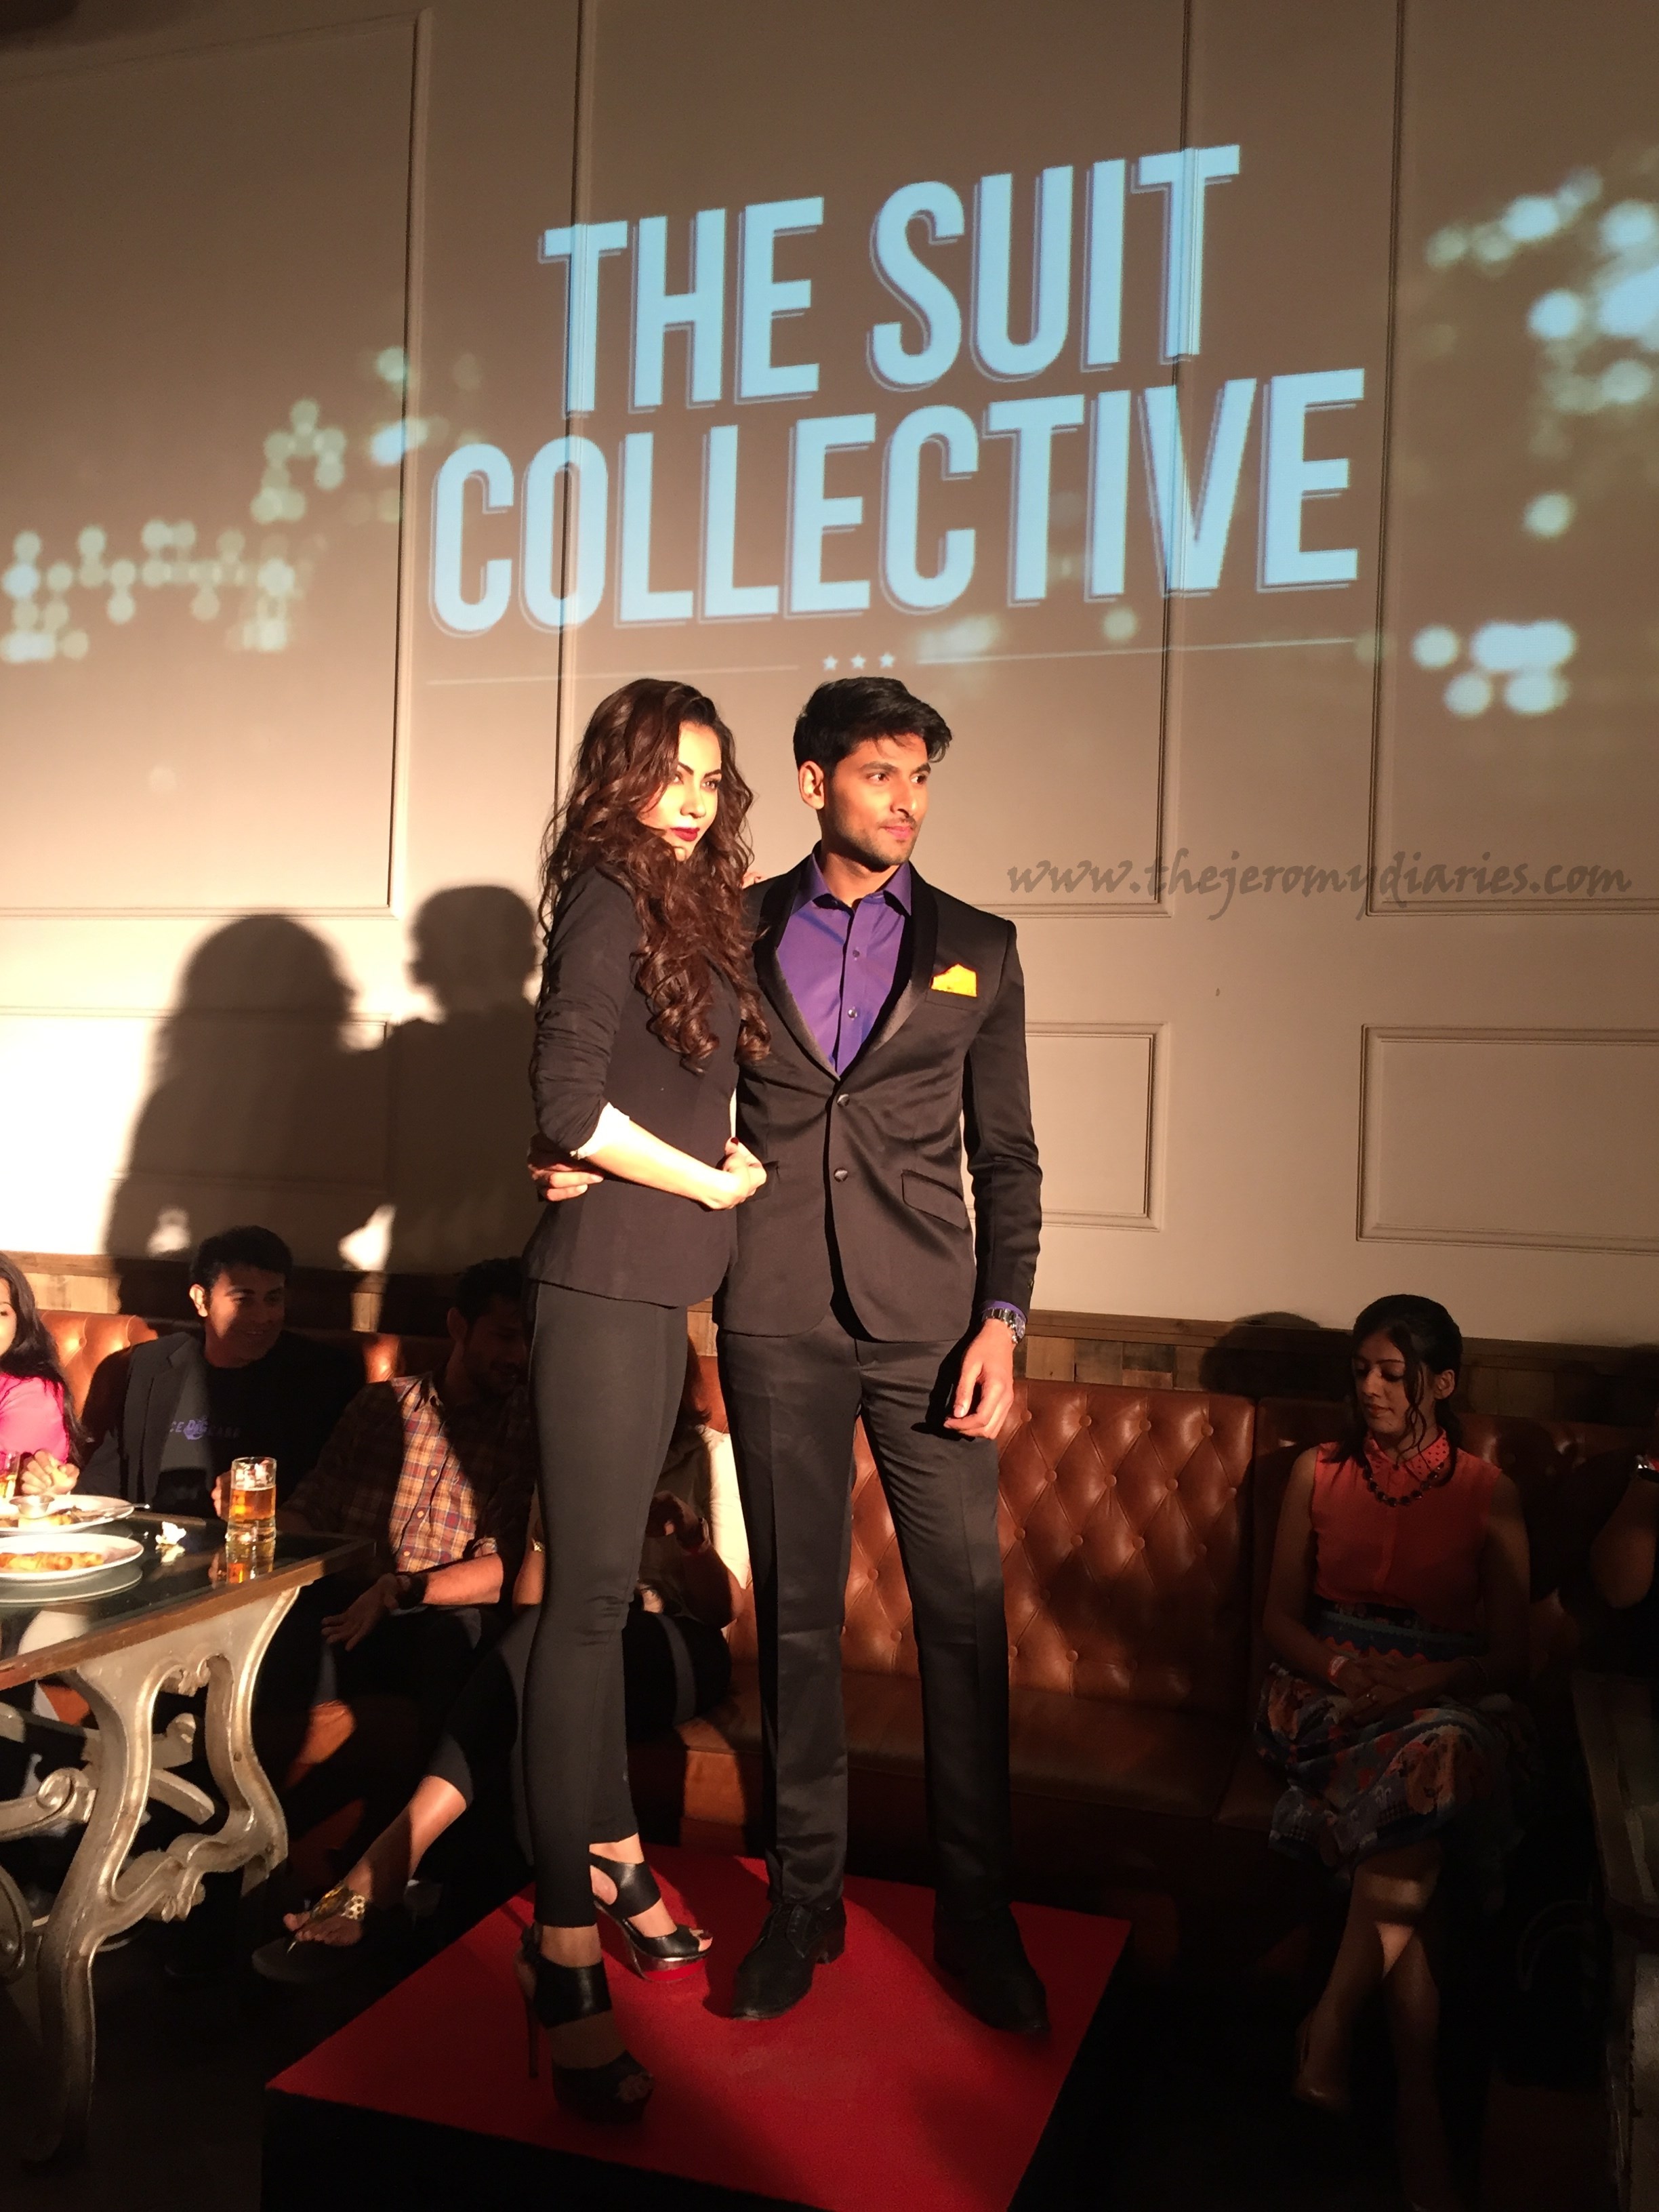 models in the suit collective by planet fashion the jeromy diaries (2448 x 3264)